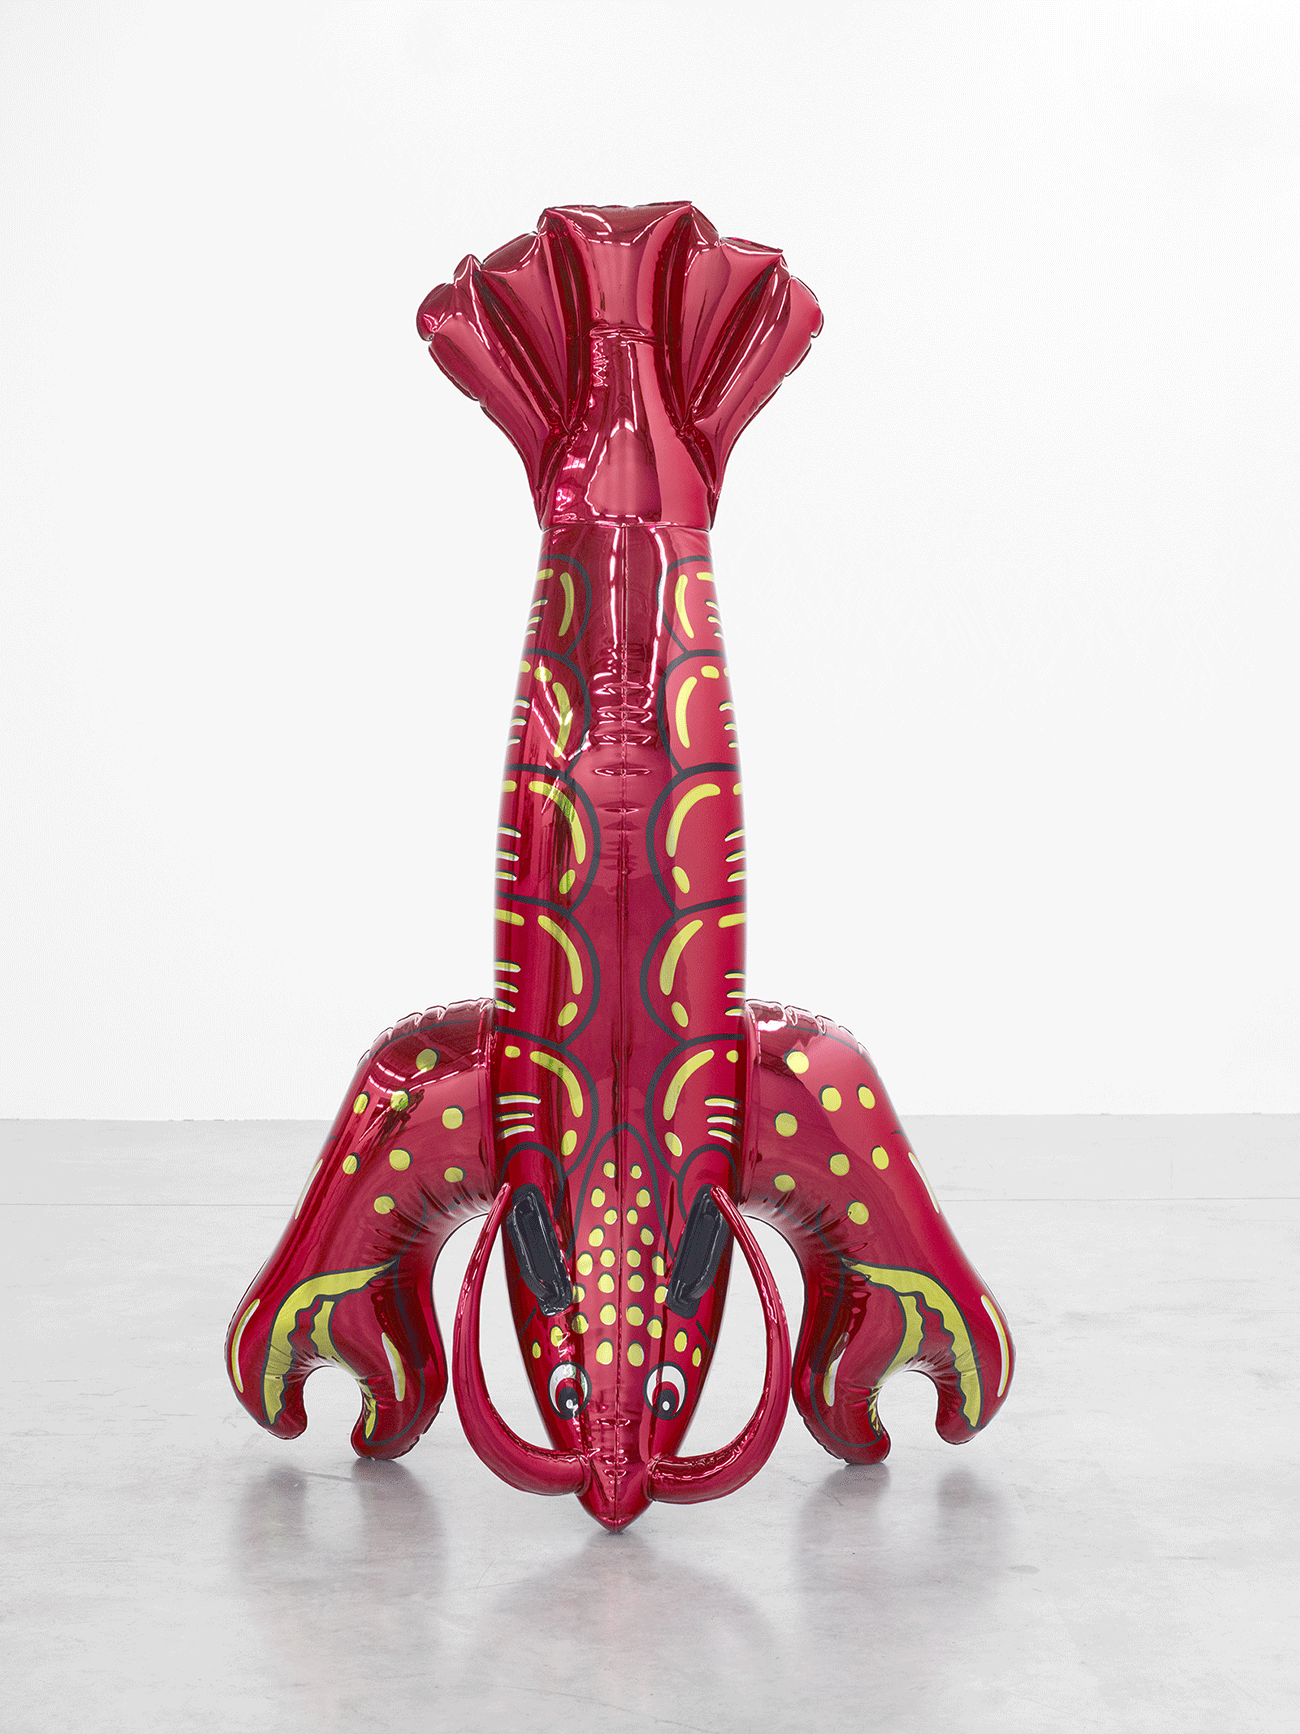 Jeff Koons. Lobster, 2007-2012. mirror-polished stainless steel with transparent color coating. 57 7/8 x 37 x 18 7/8 inches ; 147 x 94 x 47,9 cm. Edition 1 from an edition of 3, plus artist’s proof. Pinault Collection © Jeff Koons, photo: Marc Domage/Courtesy Almine Rech Gallery